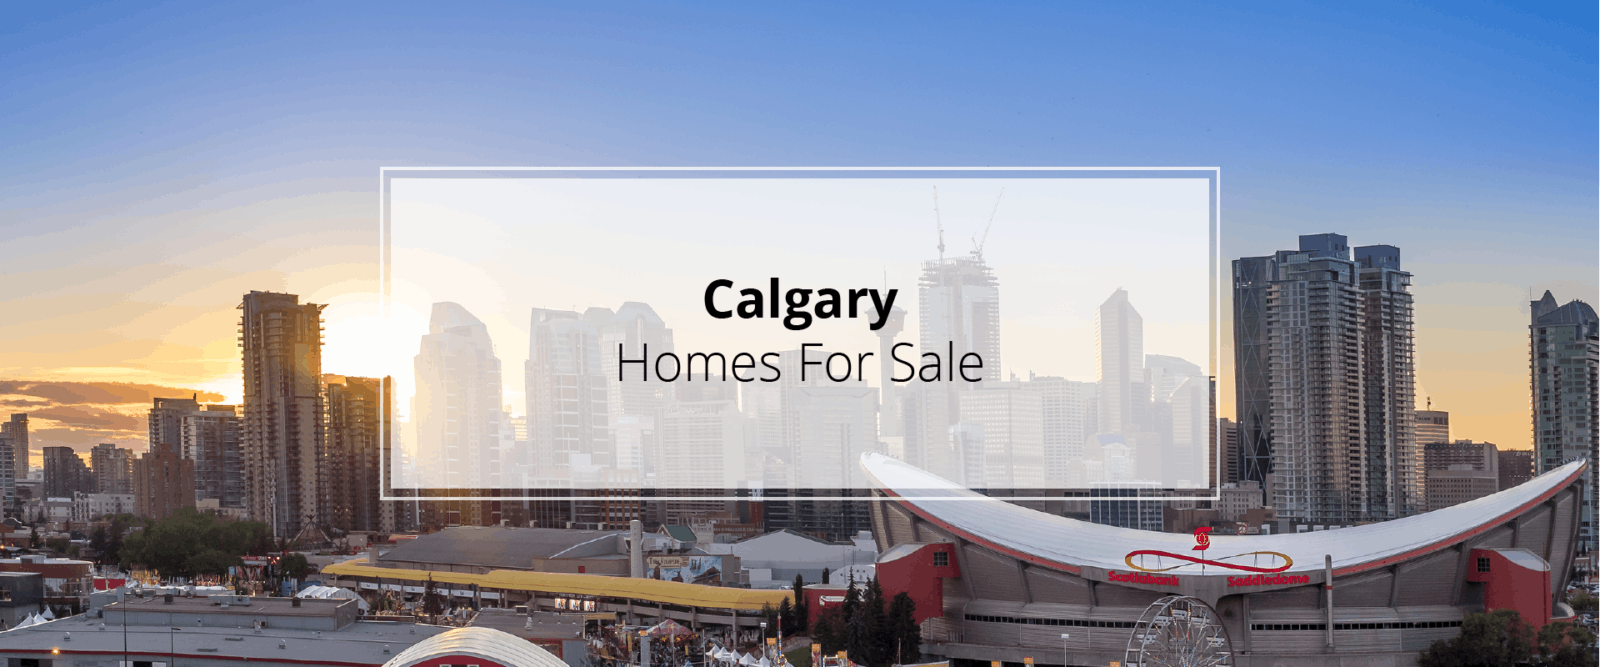 Calgary Homes For Sale Button